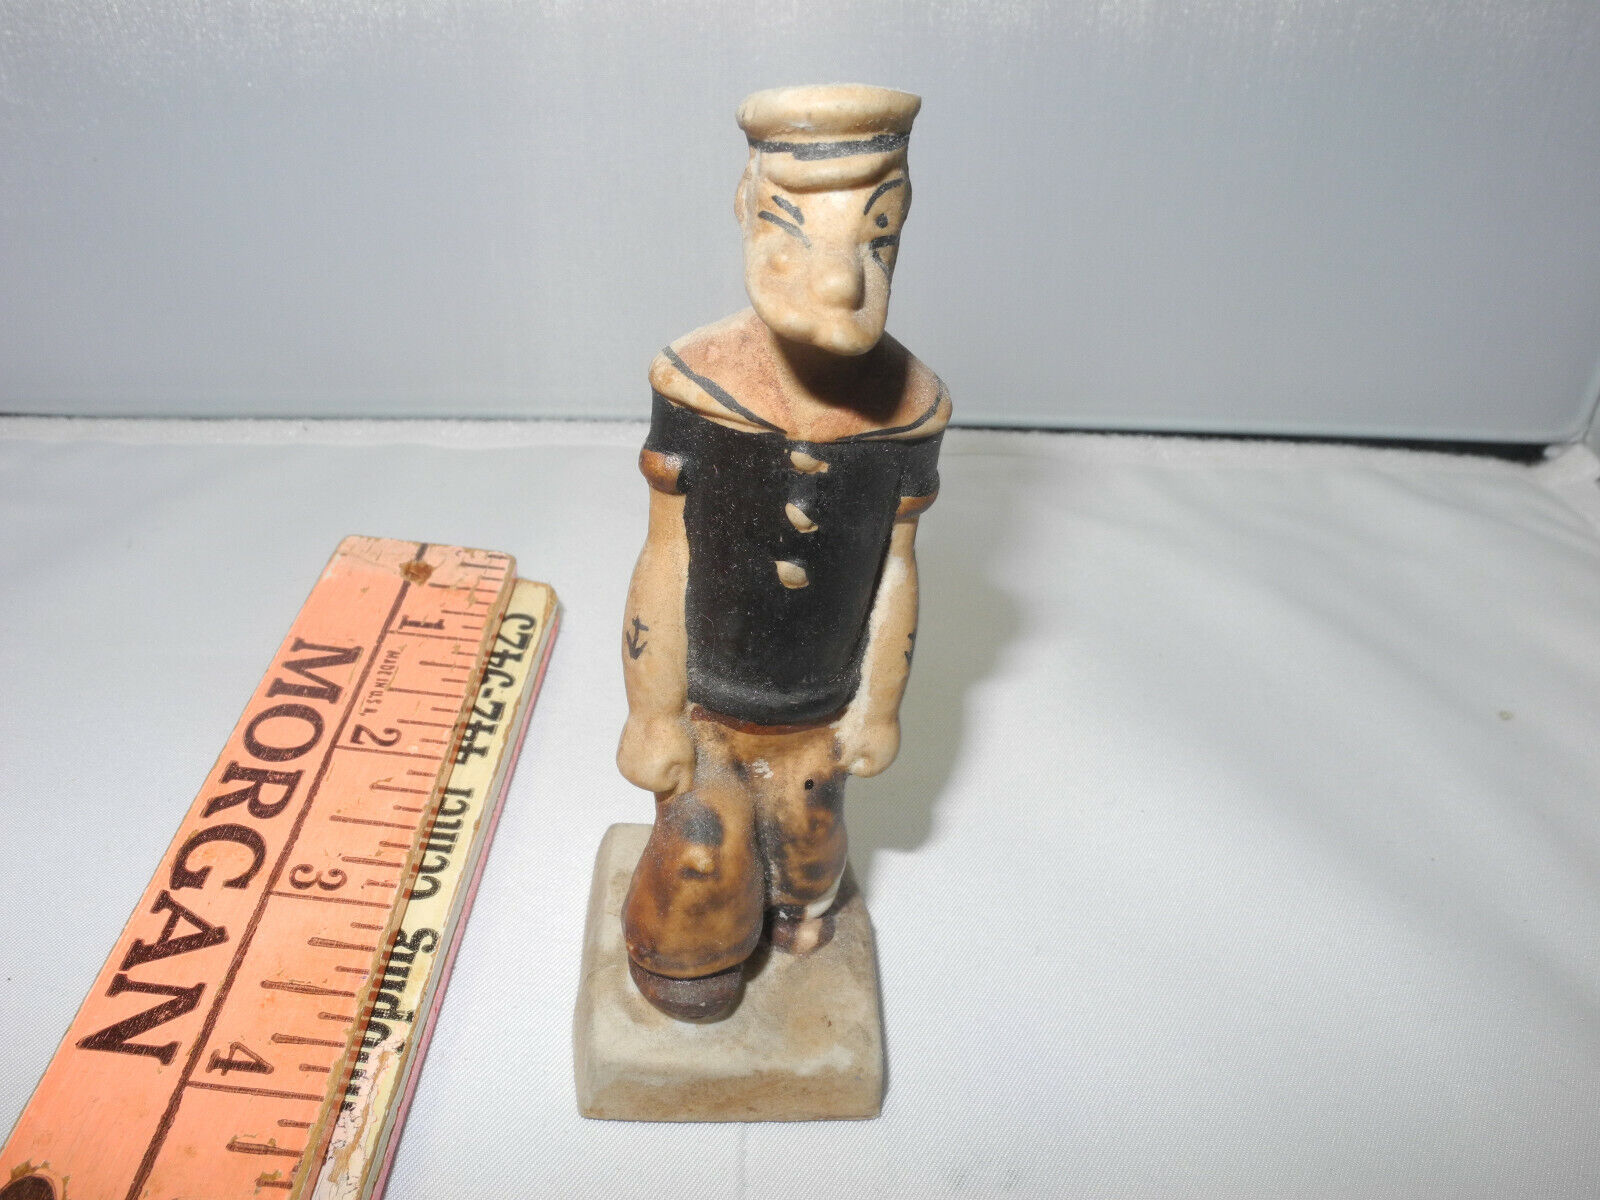 PORCELAIN POPEYE FROM THIMBLE THEATRE 1930'S KING FEATURES SYNDICATE INC 